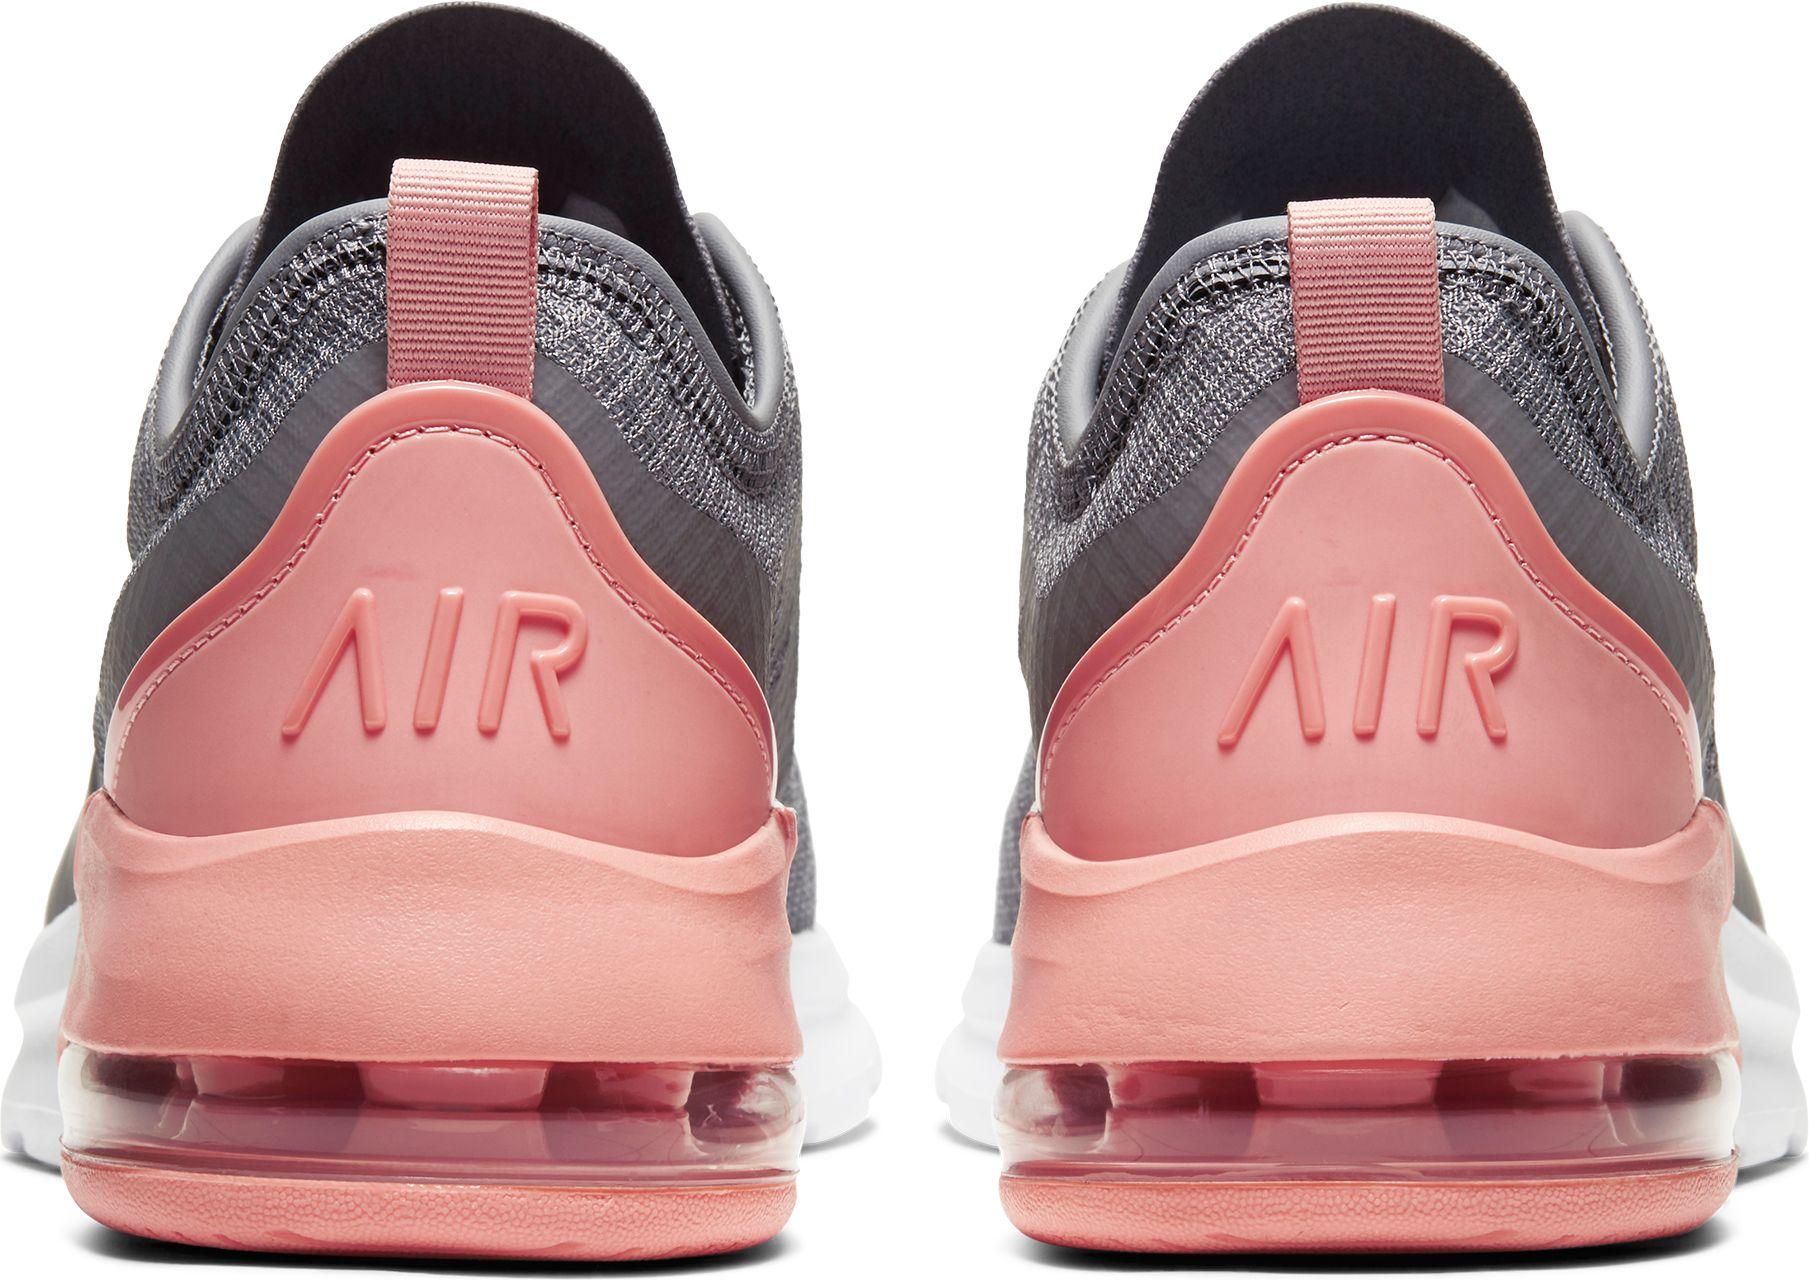 nike women's air max motion 2 shoes grey and peach